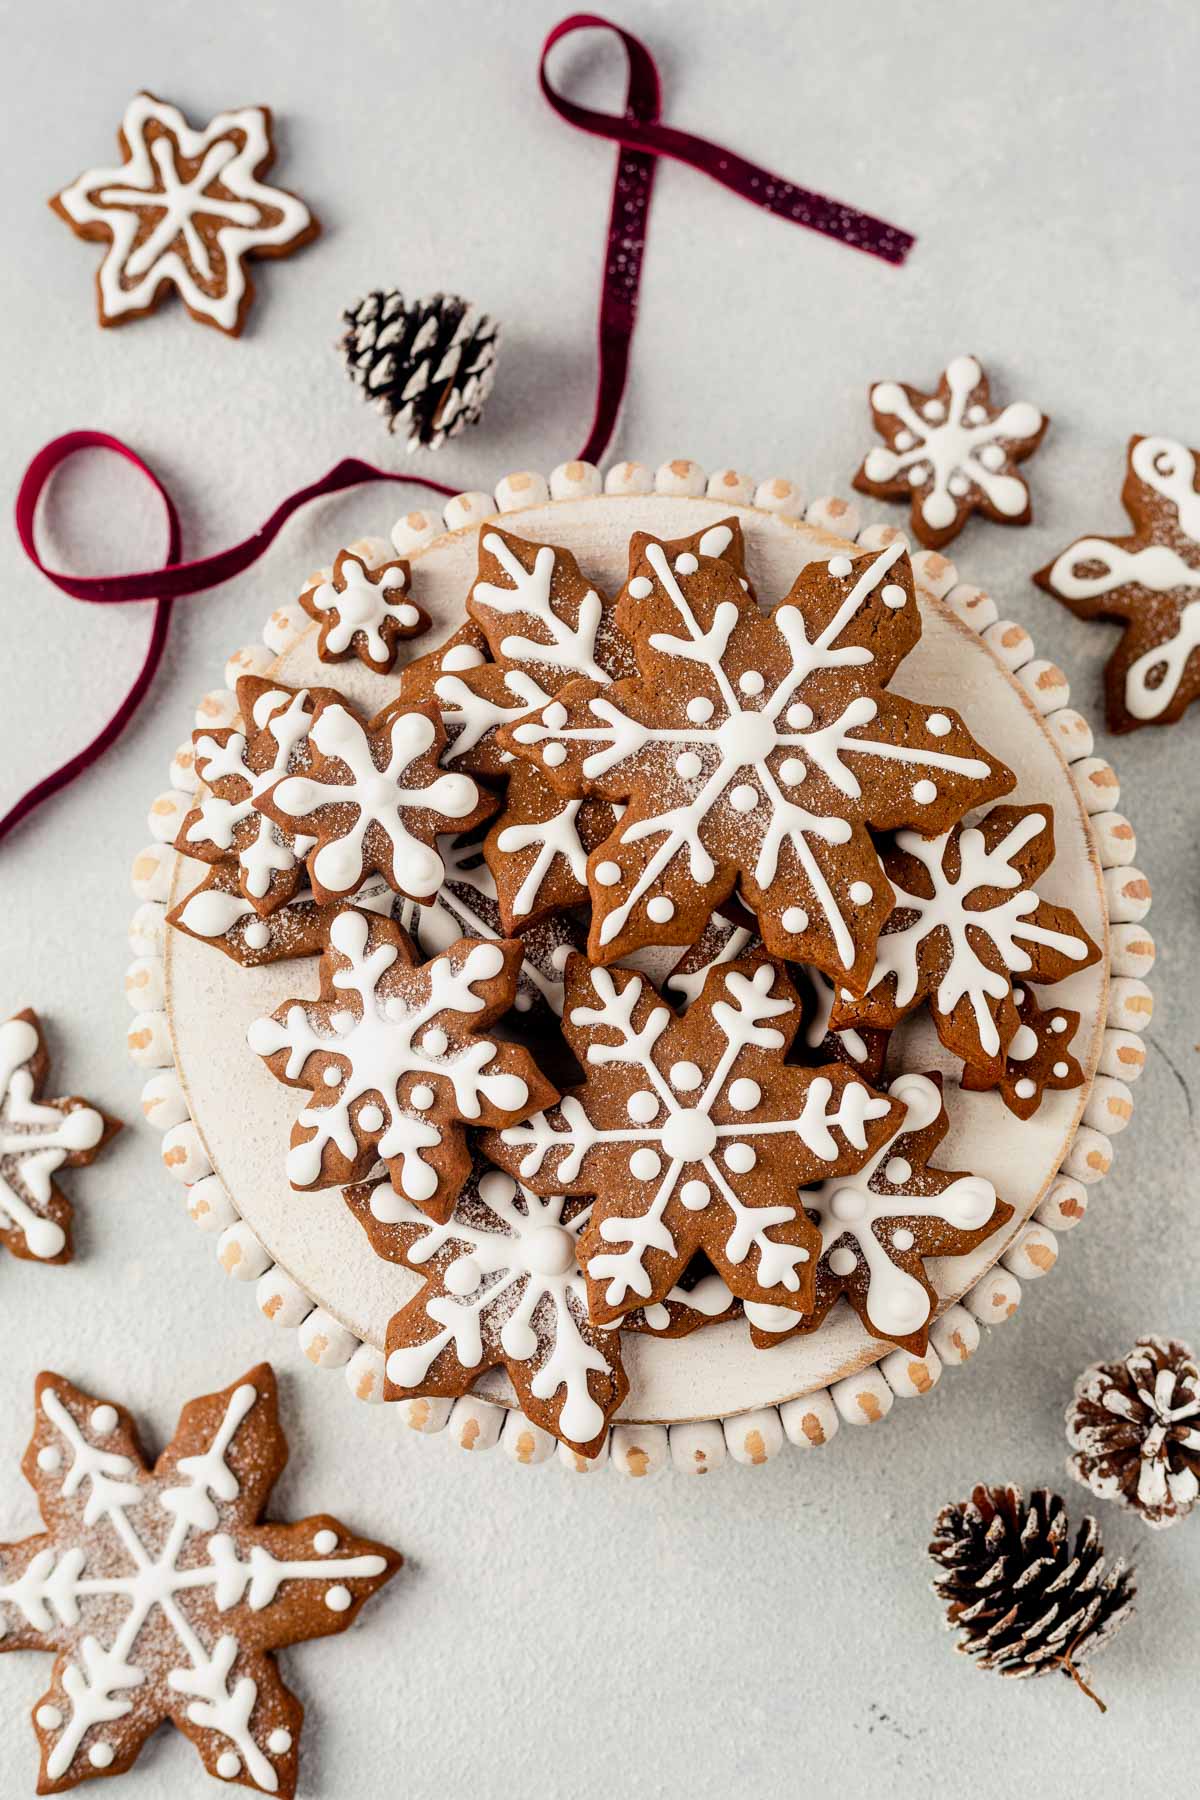 snowflake cookies decorated with royal icing stacked on a platter